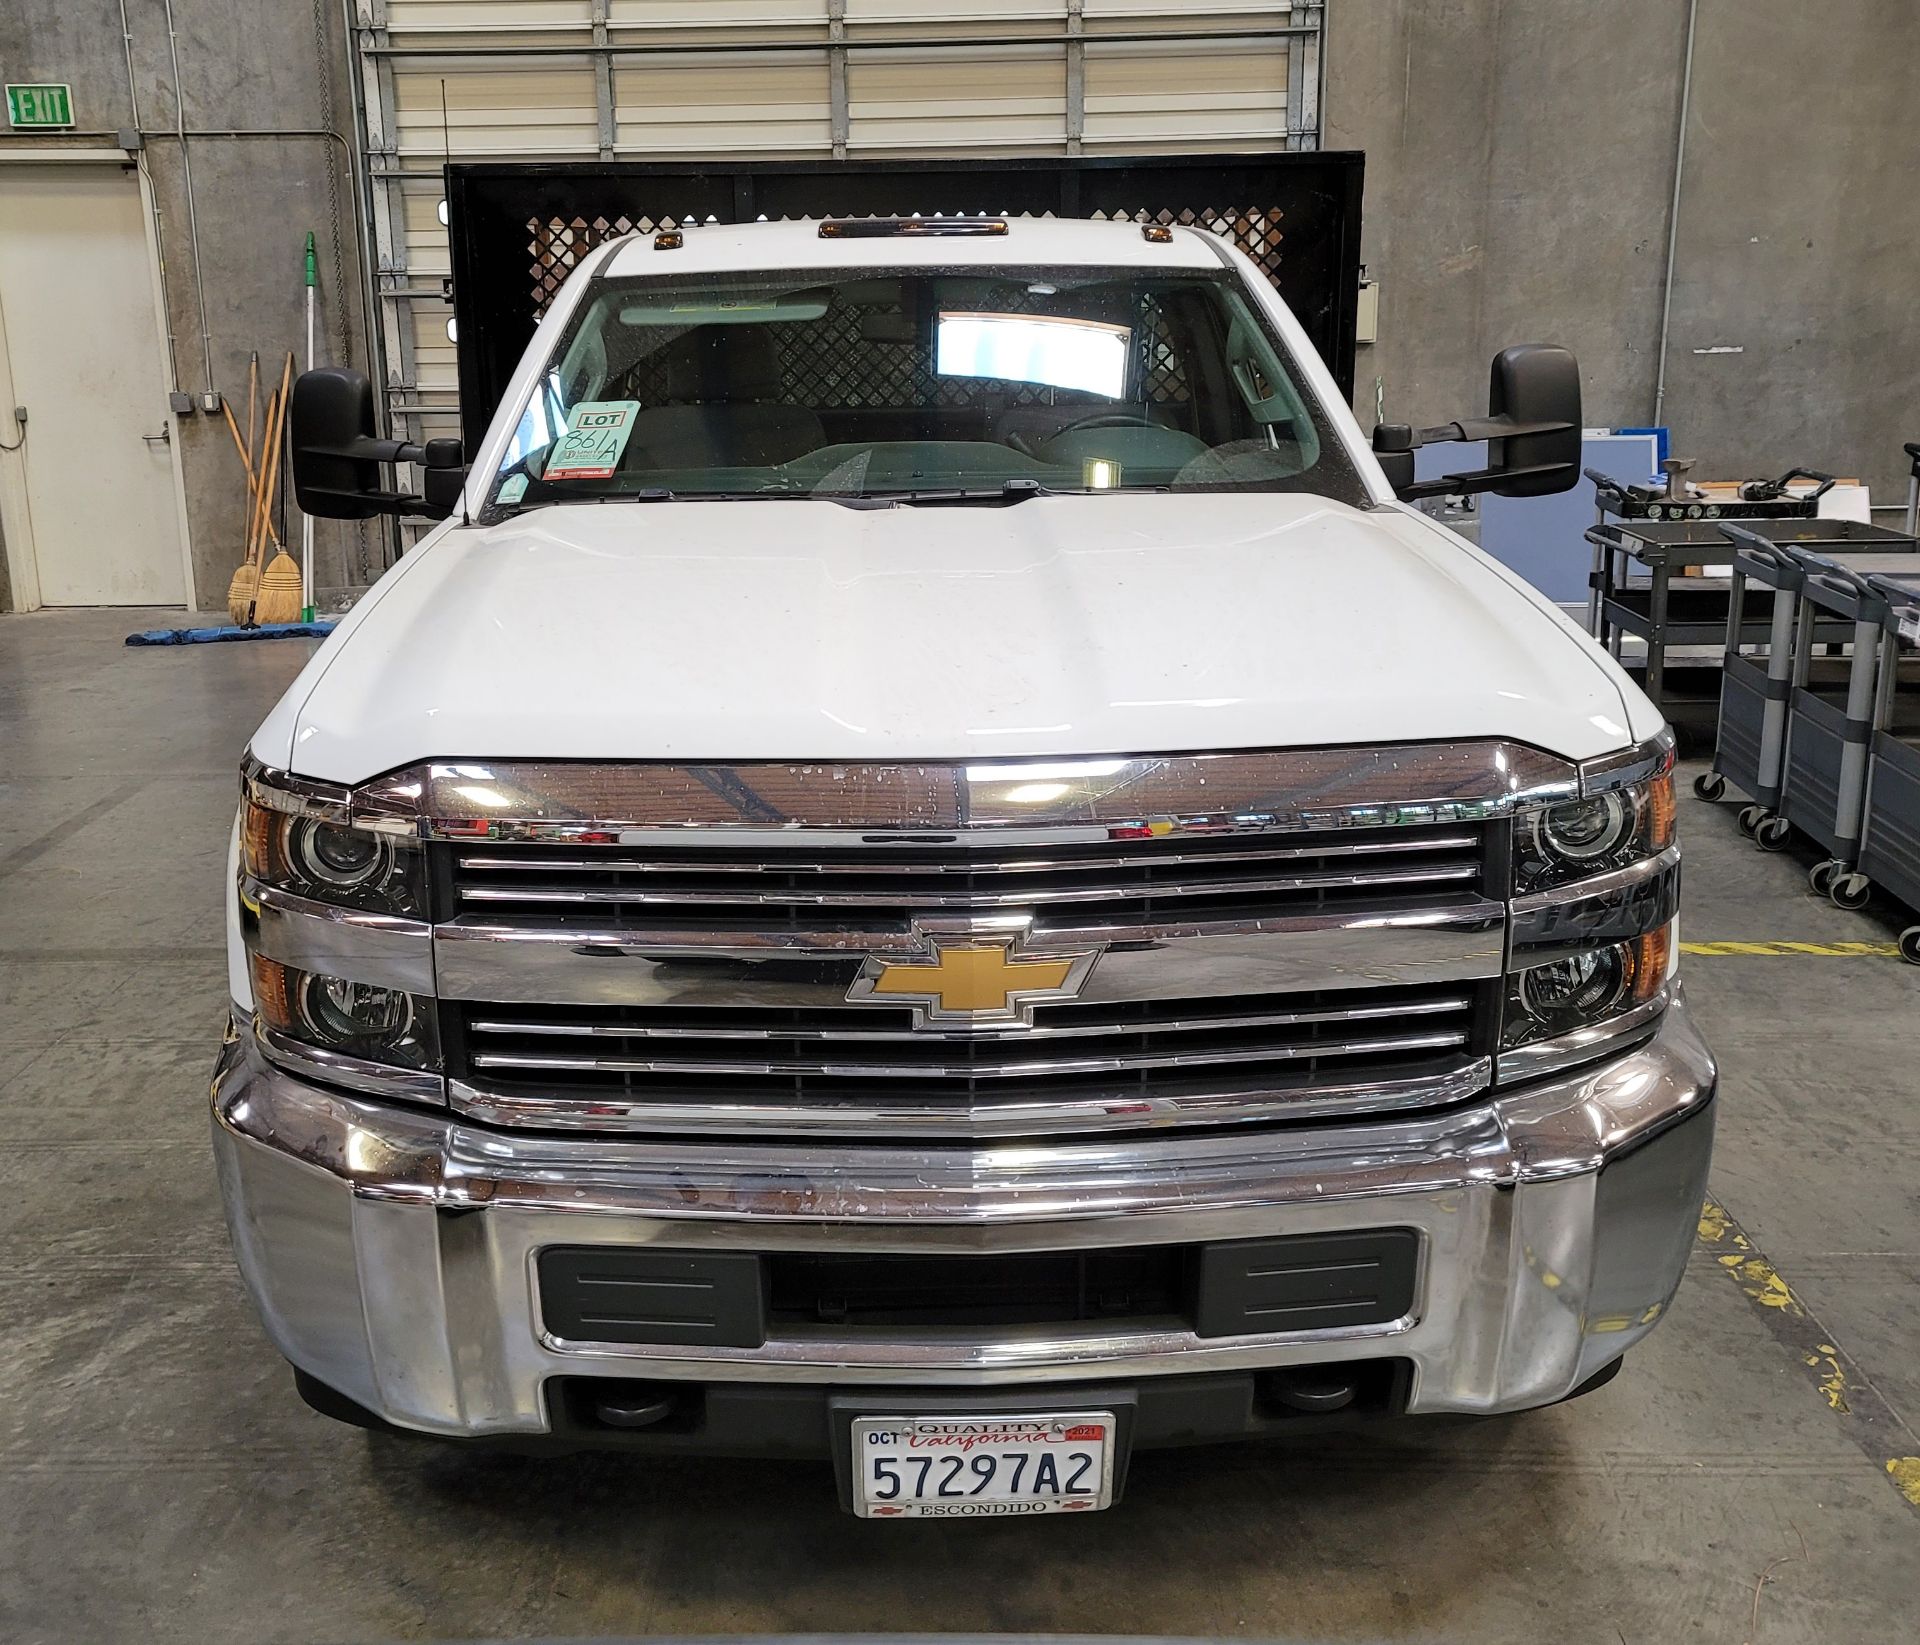 2016 CHEVROLET SILVERADO 3500 HD 13' STAKE BED TRUCK W/ TOMMY LIFT LIFTGATE, GASOLINE, 27,975 MILES, - Image 2 of 15